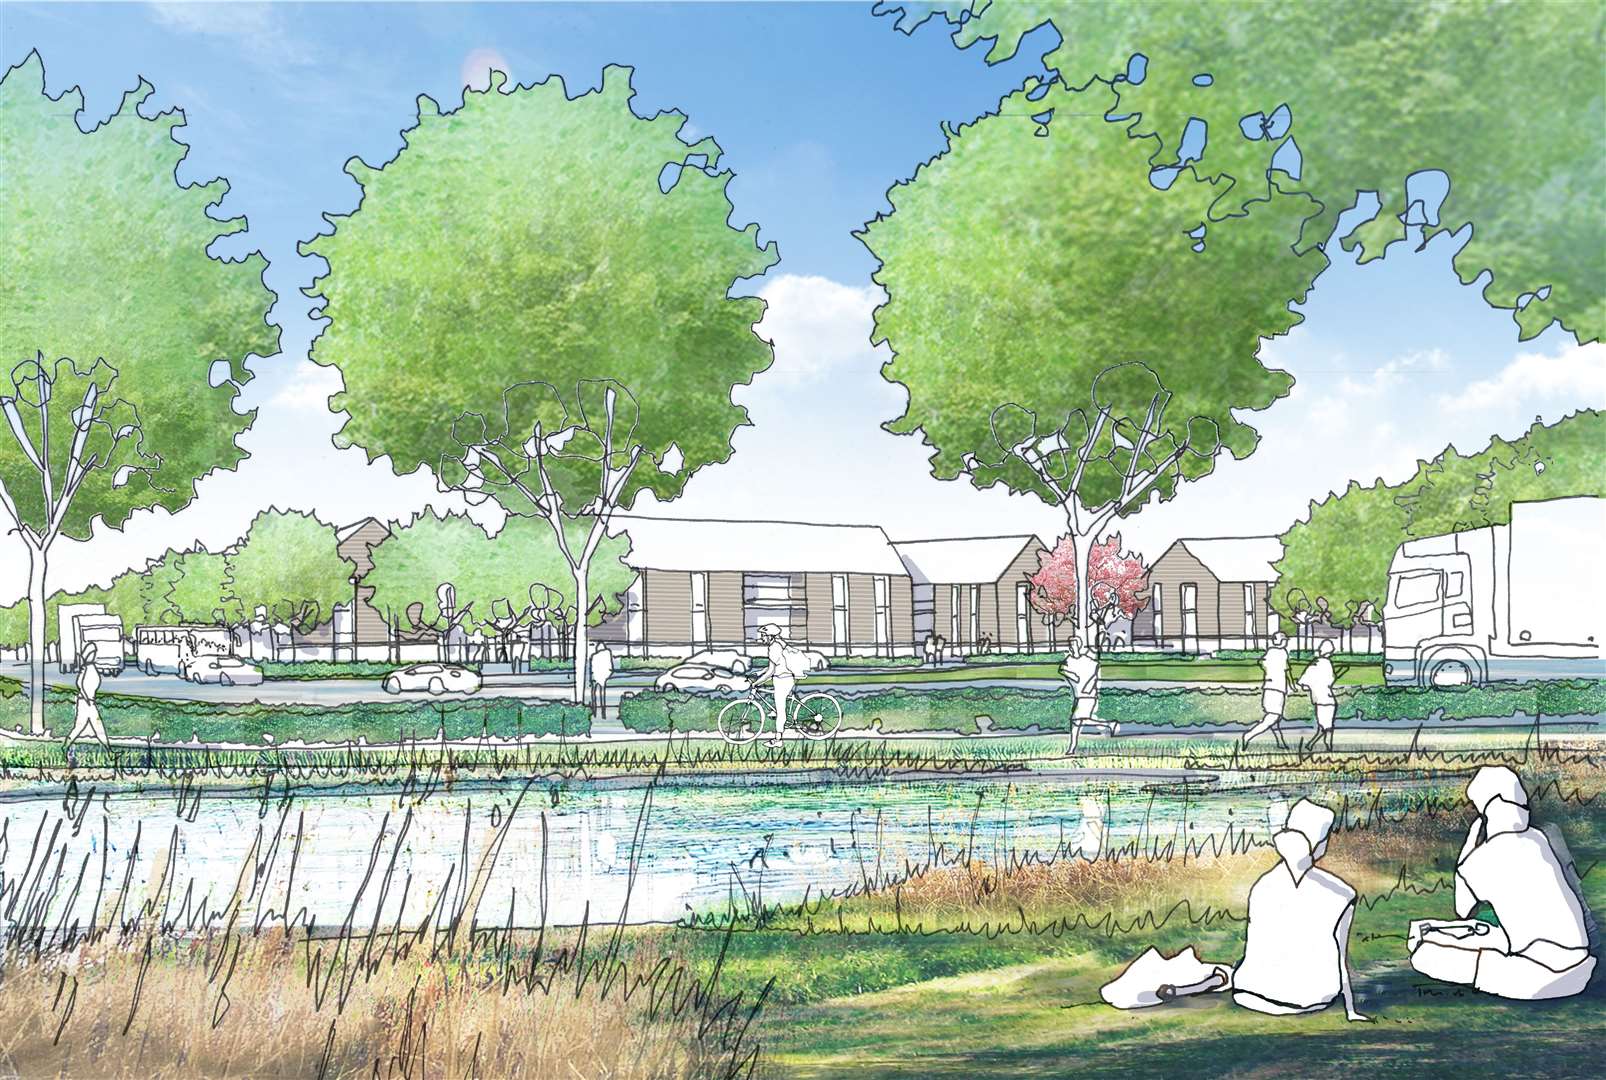 An image of the proposed 450-home site in Greenhill